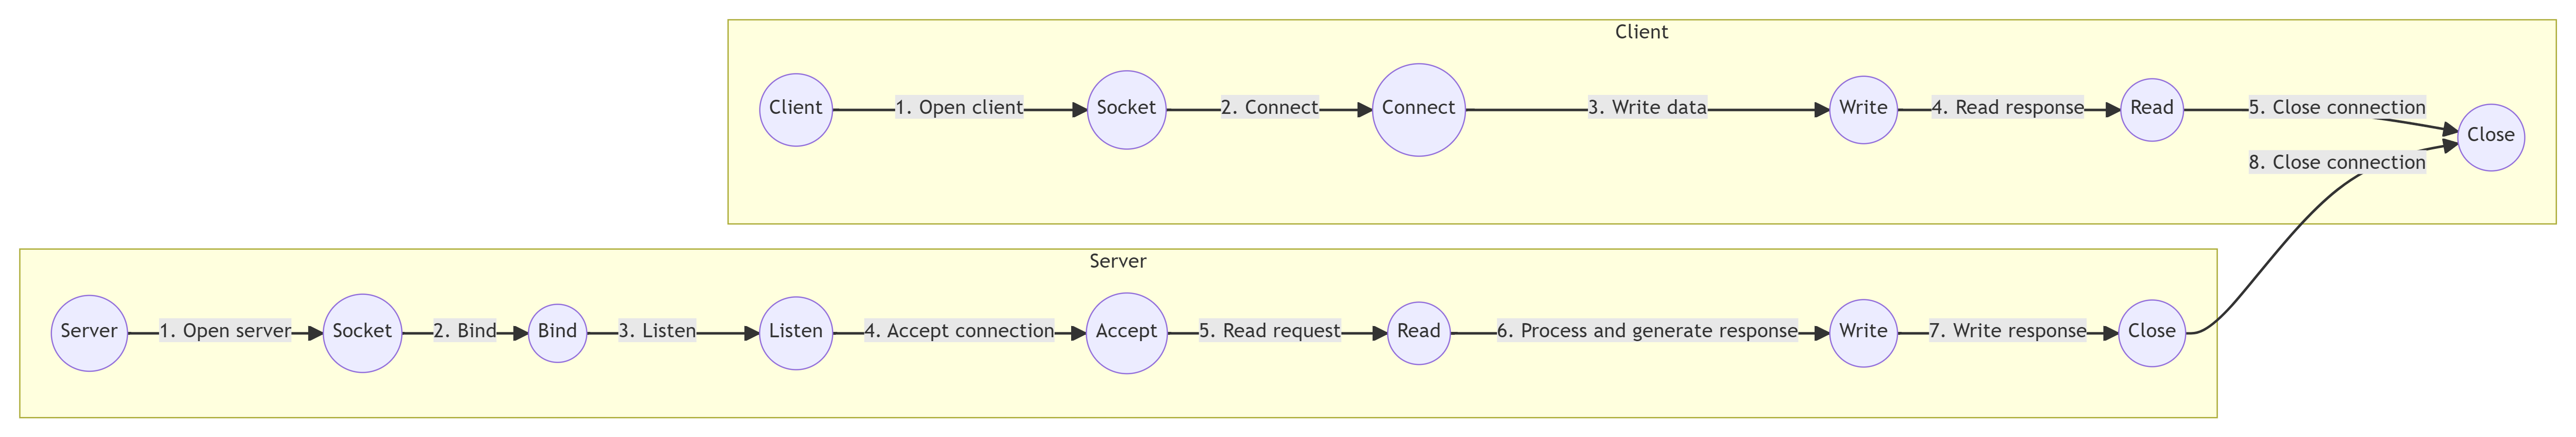 client-server architecture for the socket programming